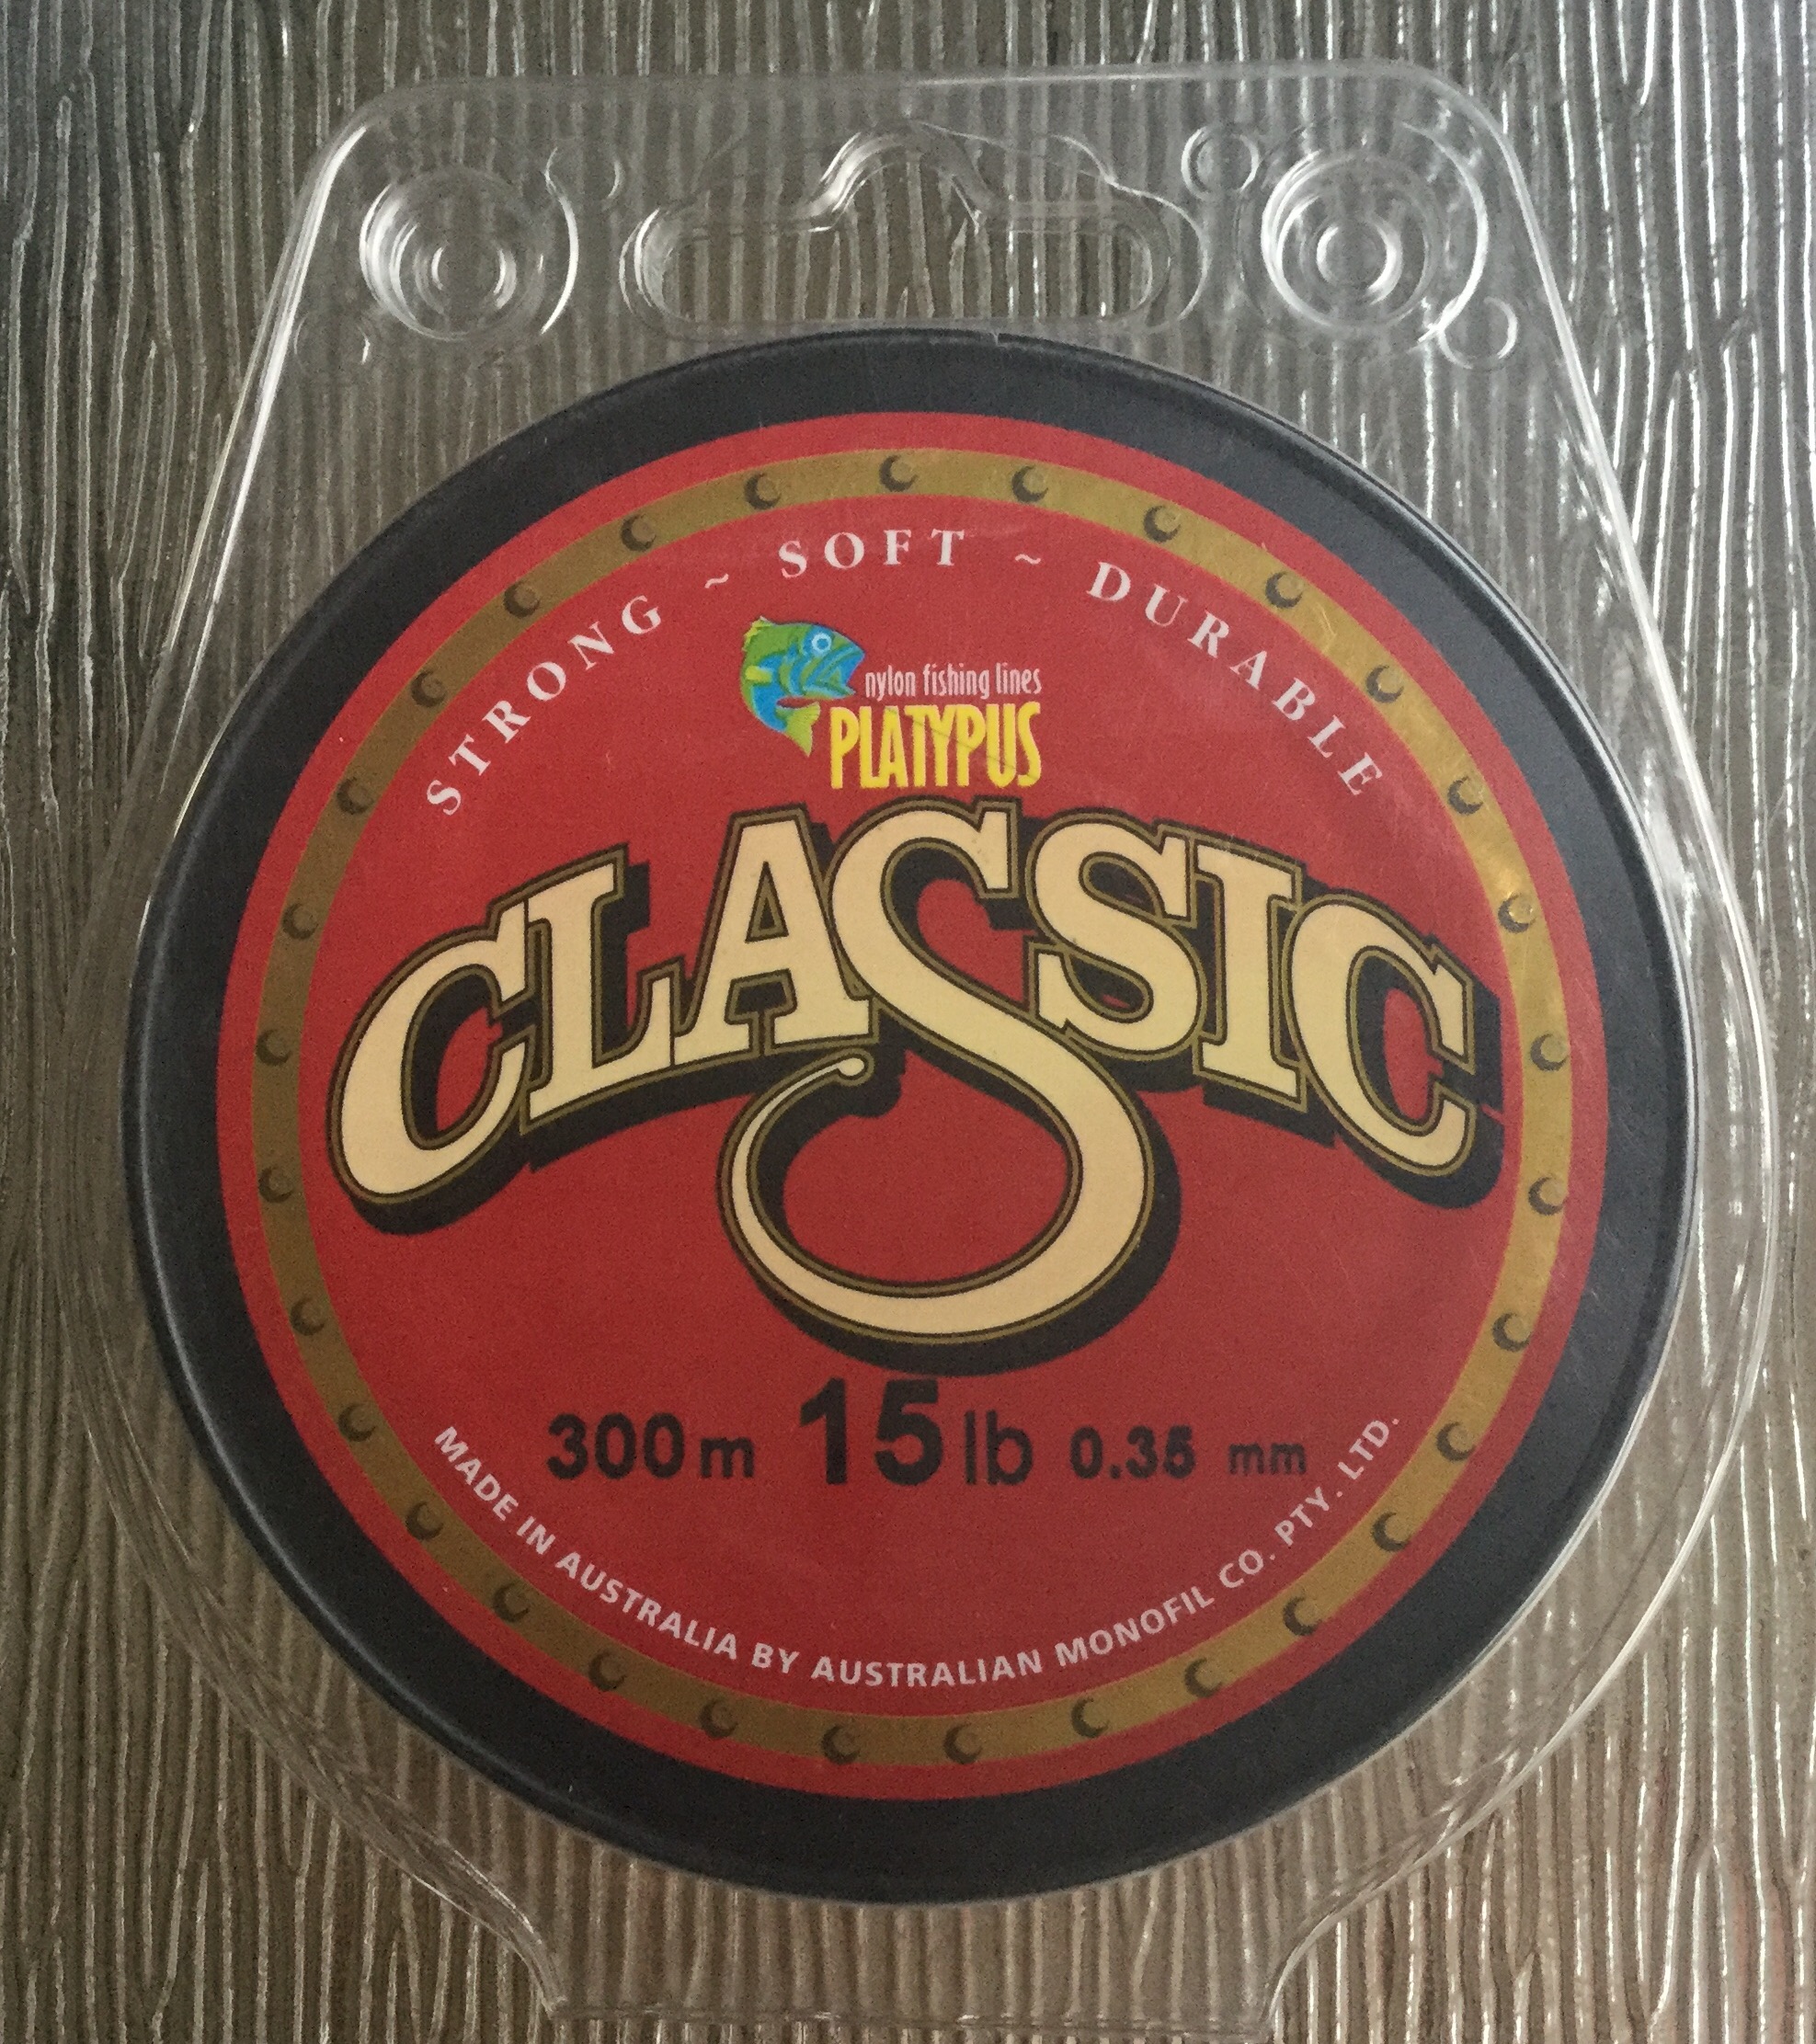 Buy 500m Spool of 8lb Clear Platypus Monoflex Mono Fishing Line - Aussie  Made Line at Barbeques Galore.